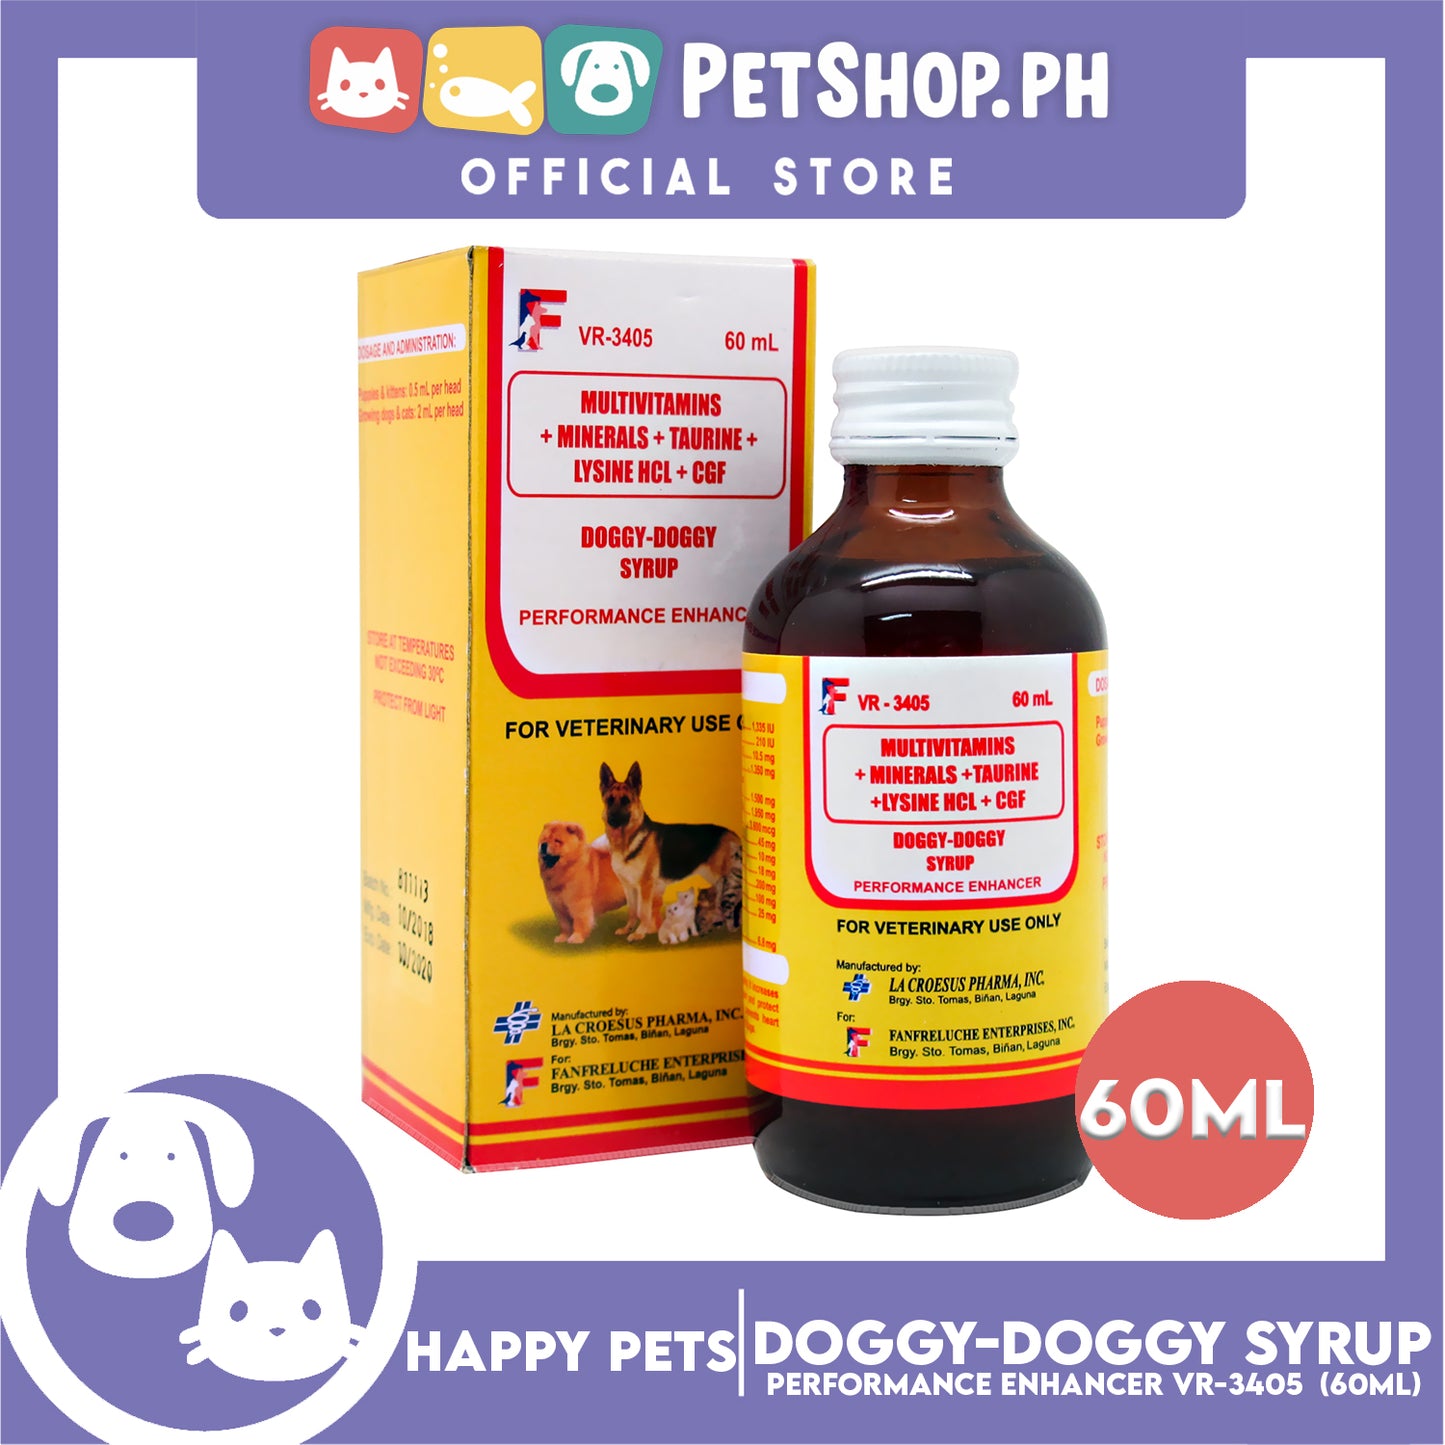 Happy Pets Doggy Doggy Syrup, Multivitamins + Minerals + Taurine + Lysine HCL + CGF Enhancer for Cats and Dogs 60ml